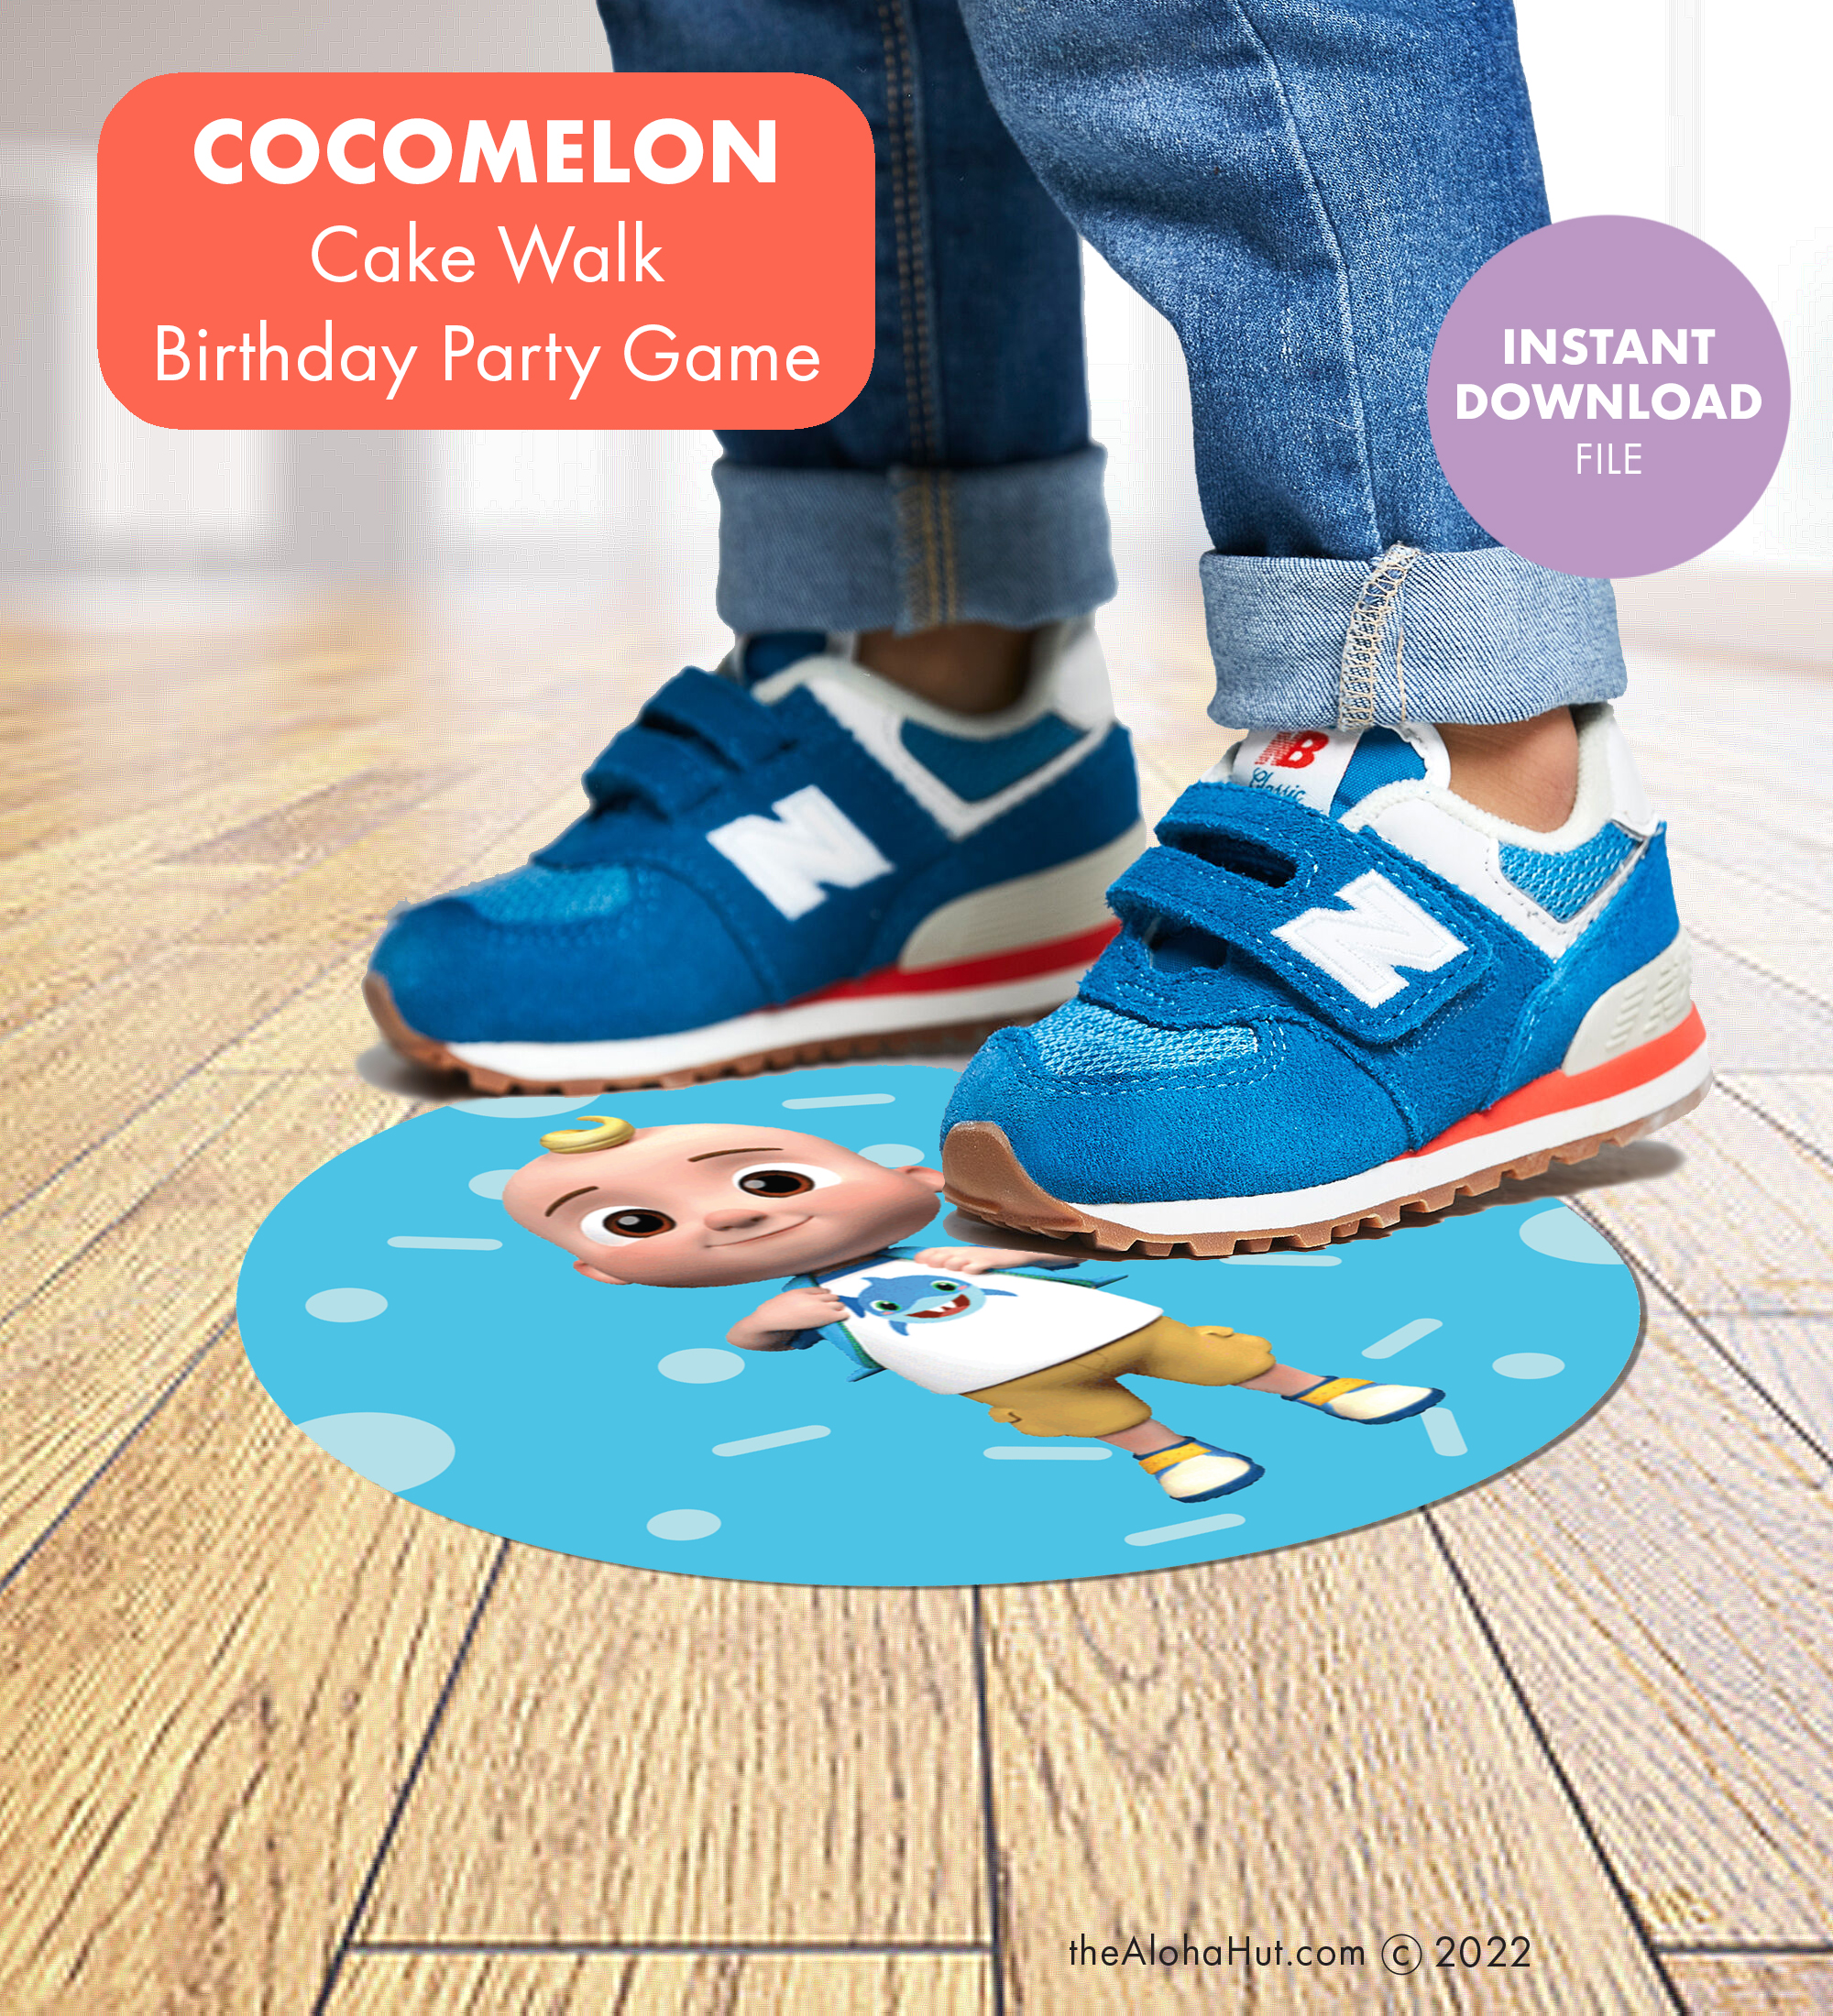 Cocomelon Birthday Party Cake Walk Game